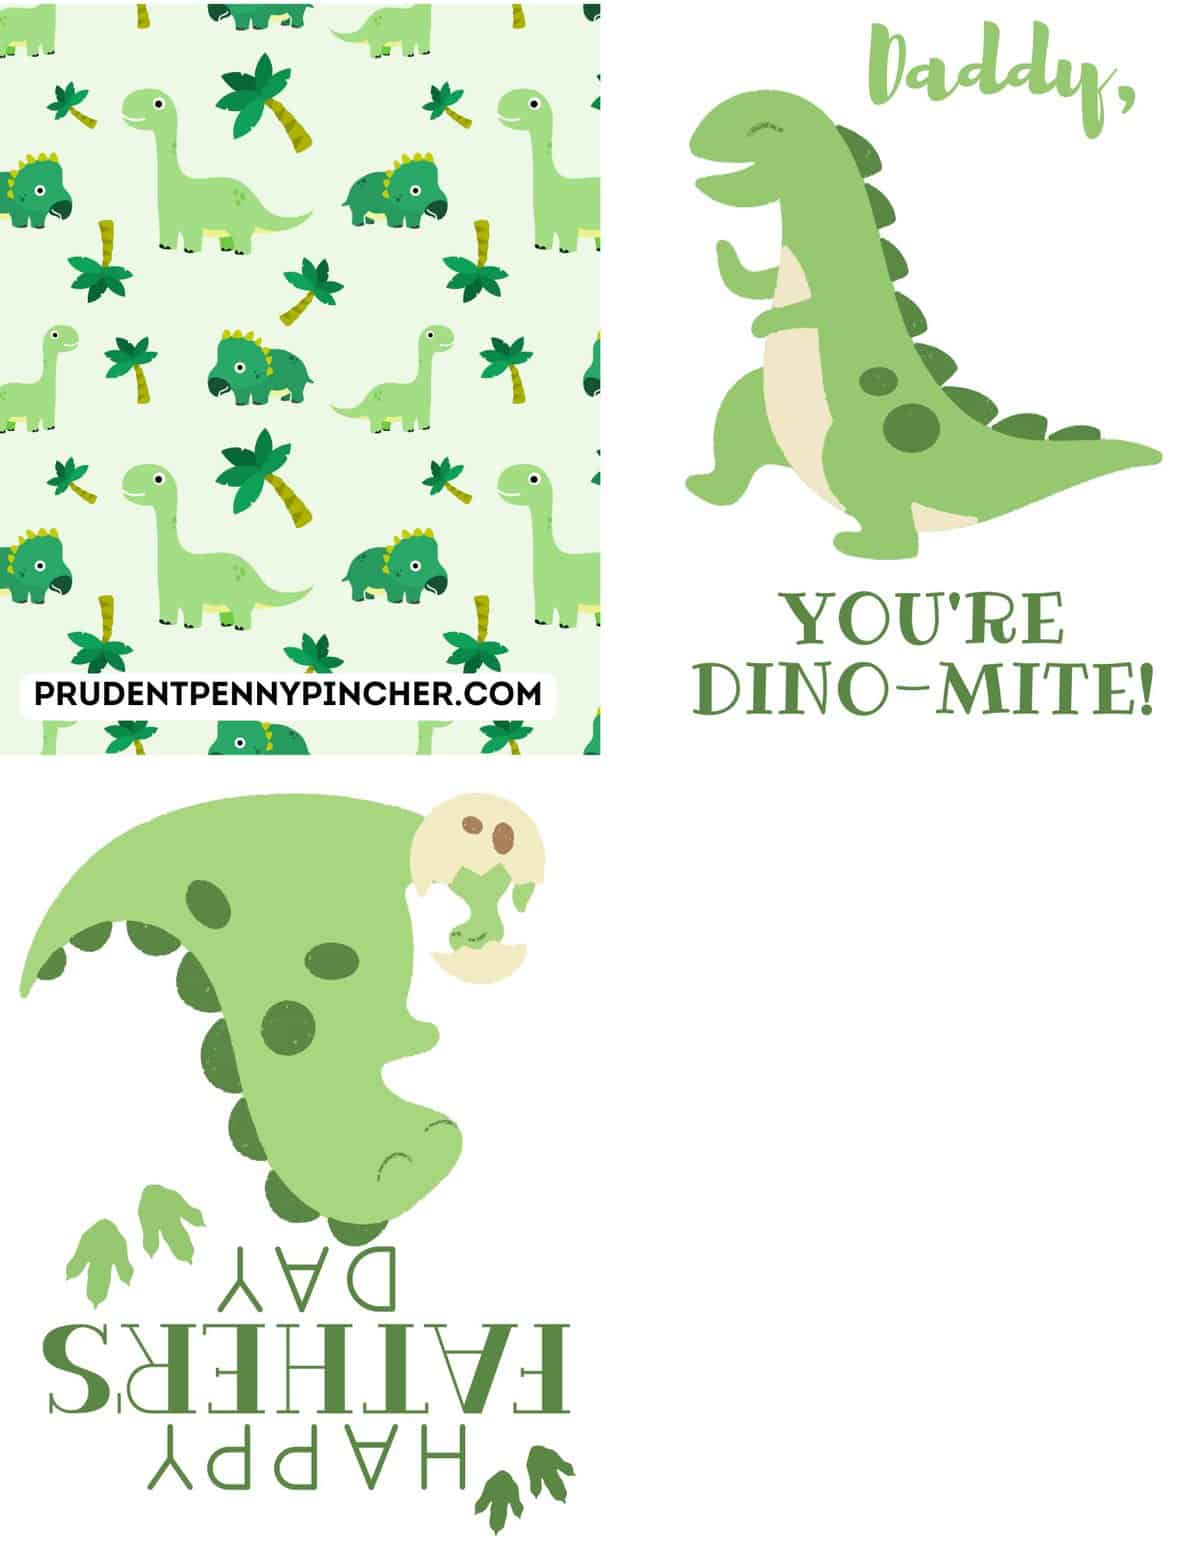 printable dino-mite daddy card for Father's Day